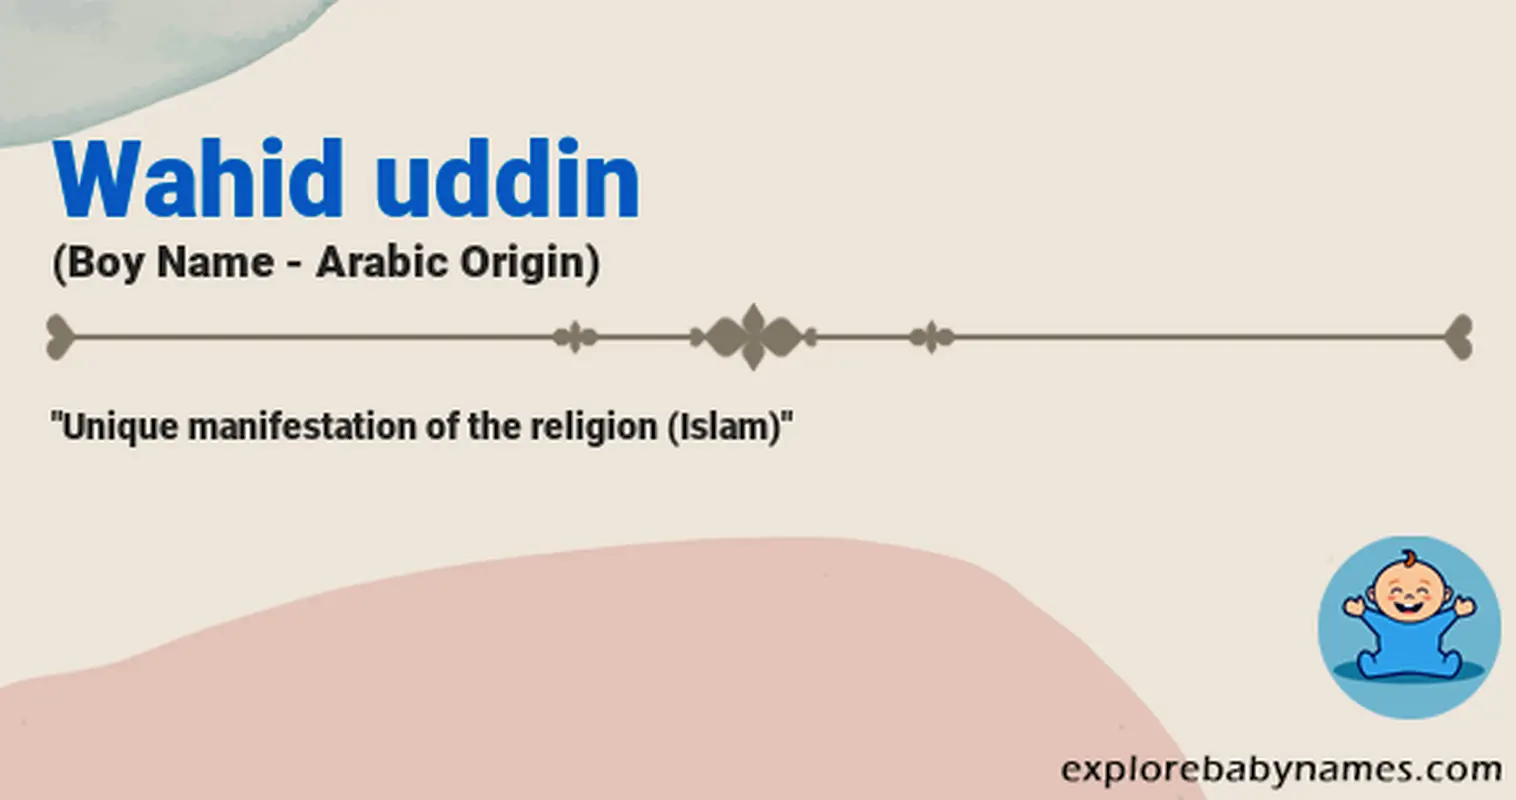 Meaning of Wahid uddin